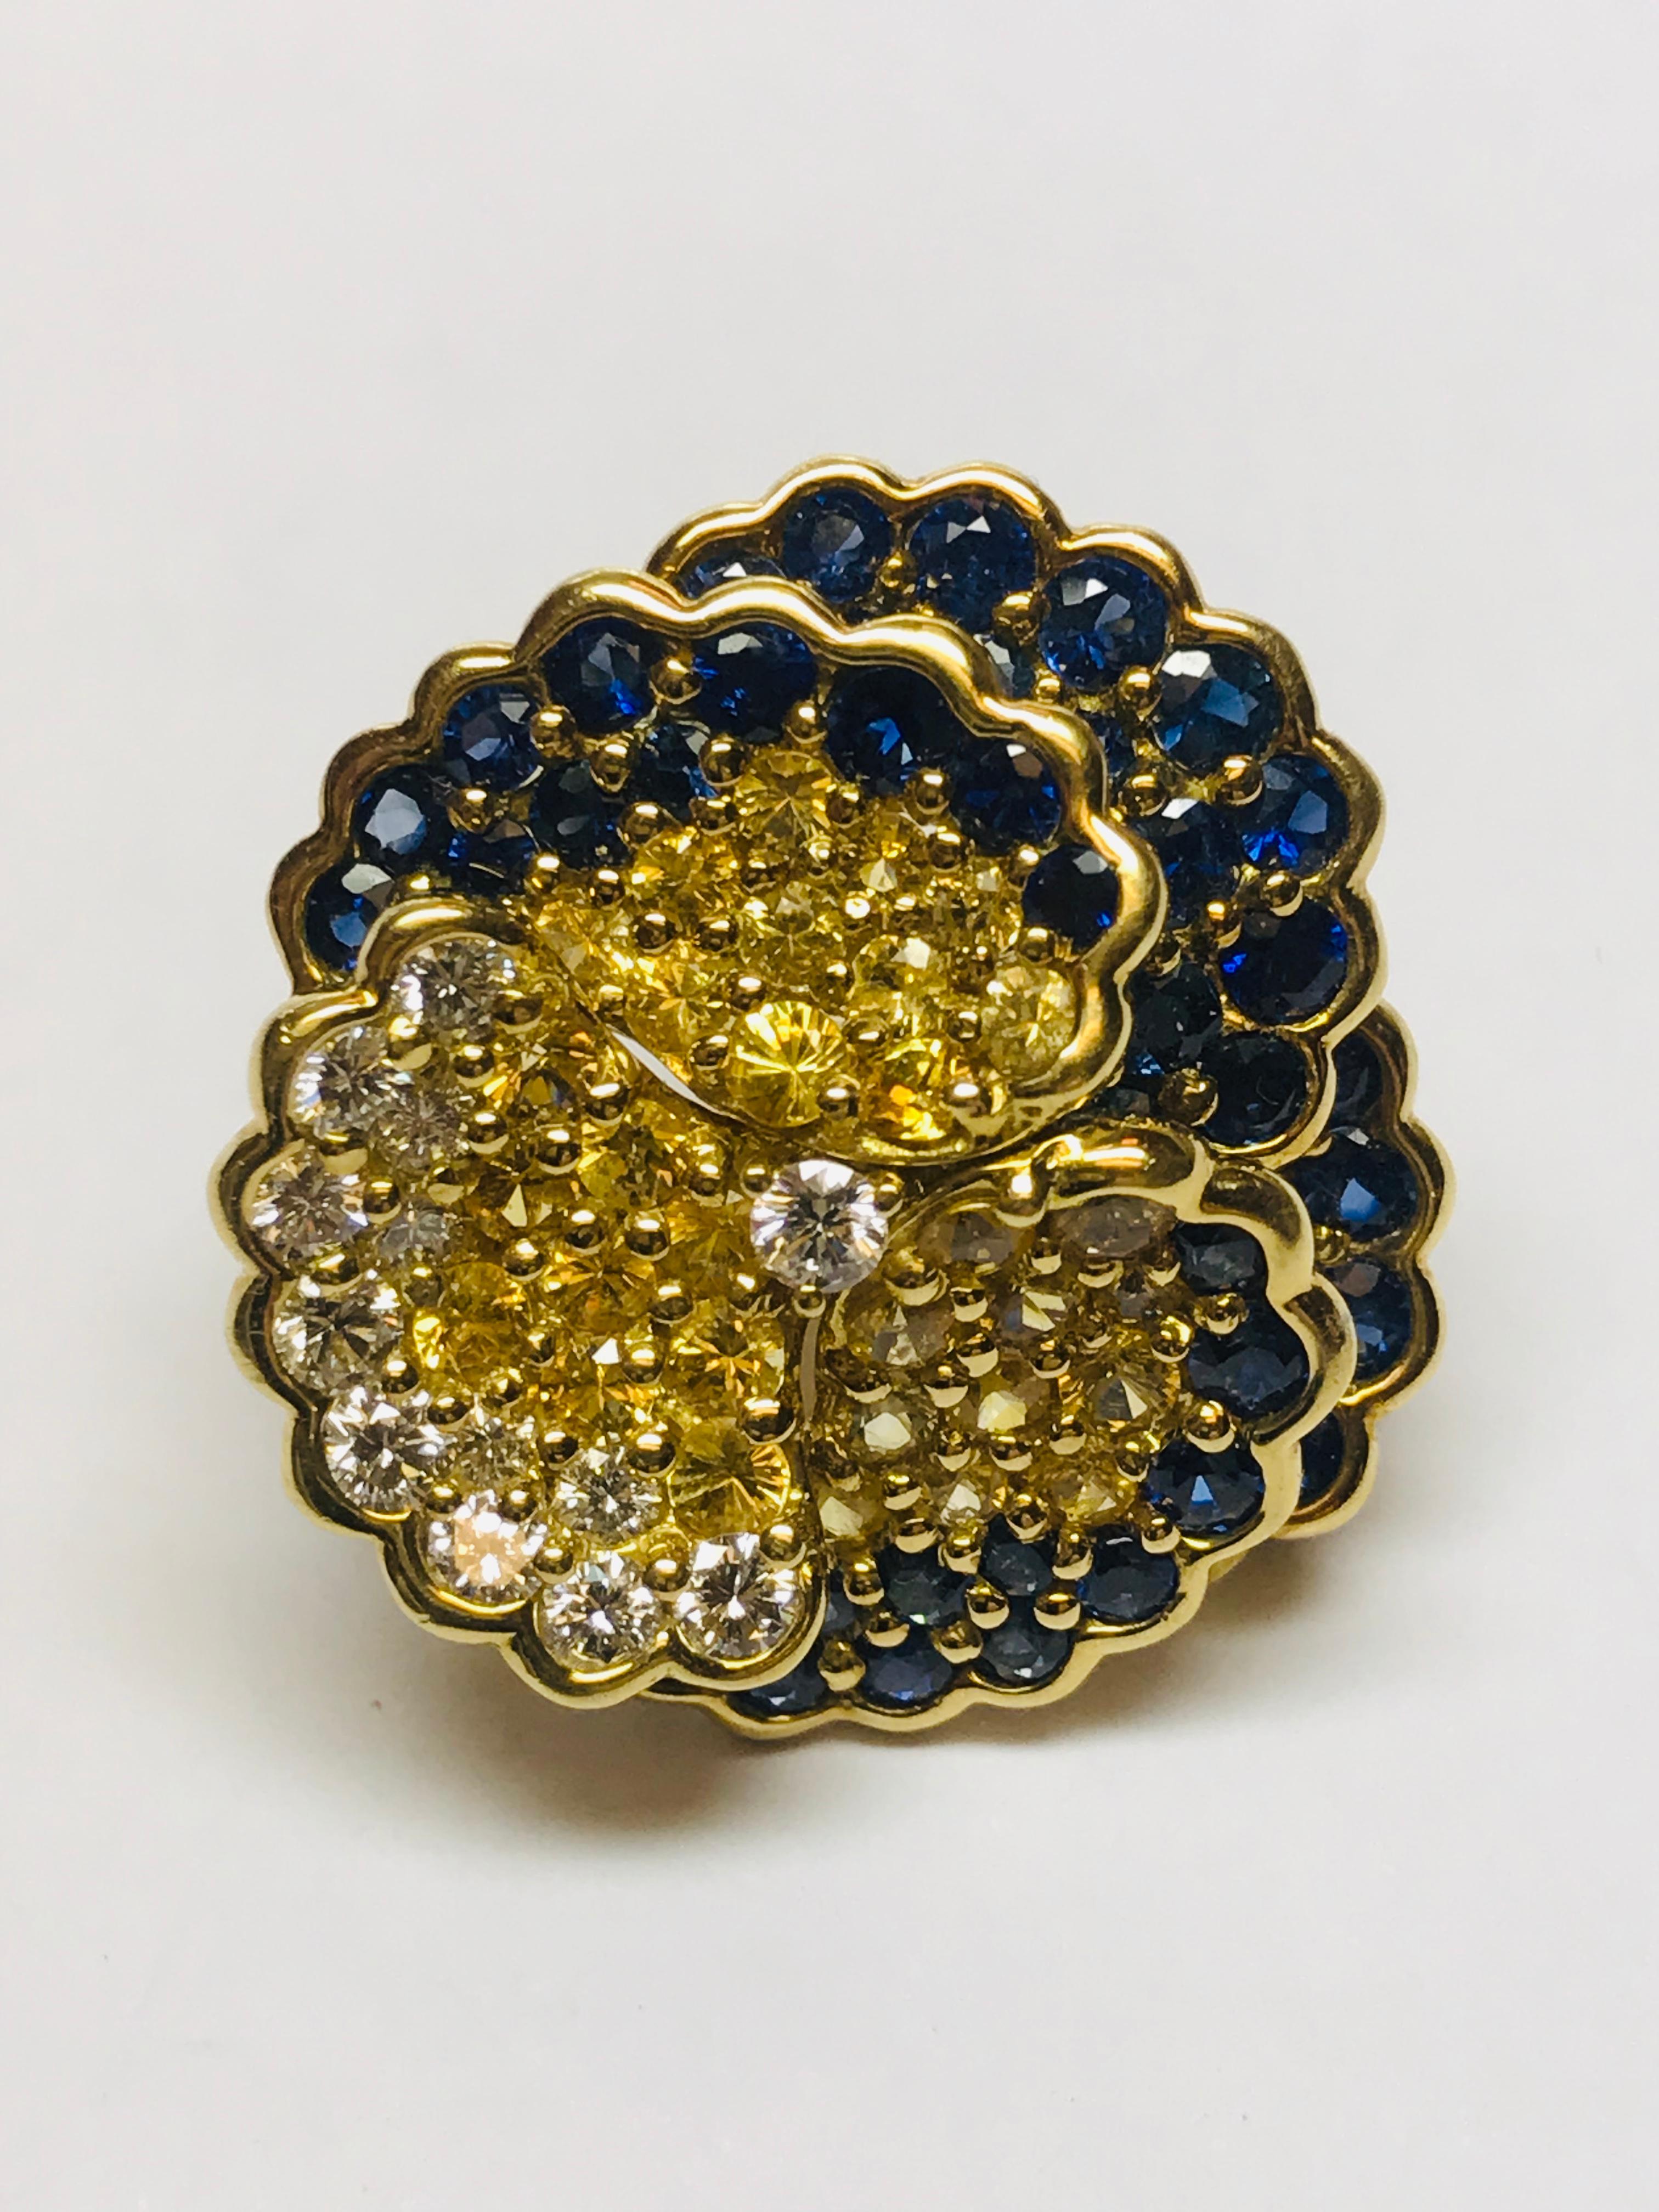 This brooch/ pendant designed and manufactured by Gemlok, combines a total of 6.61 carats of yellow and blue gem quality sapphires with .75 carats of white diamond. 